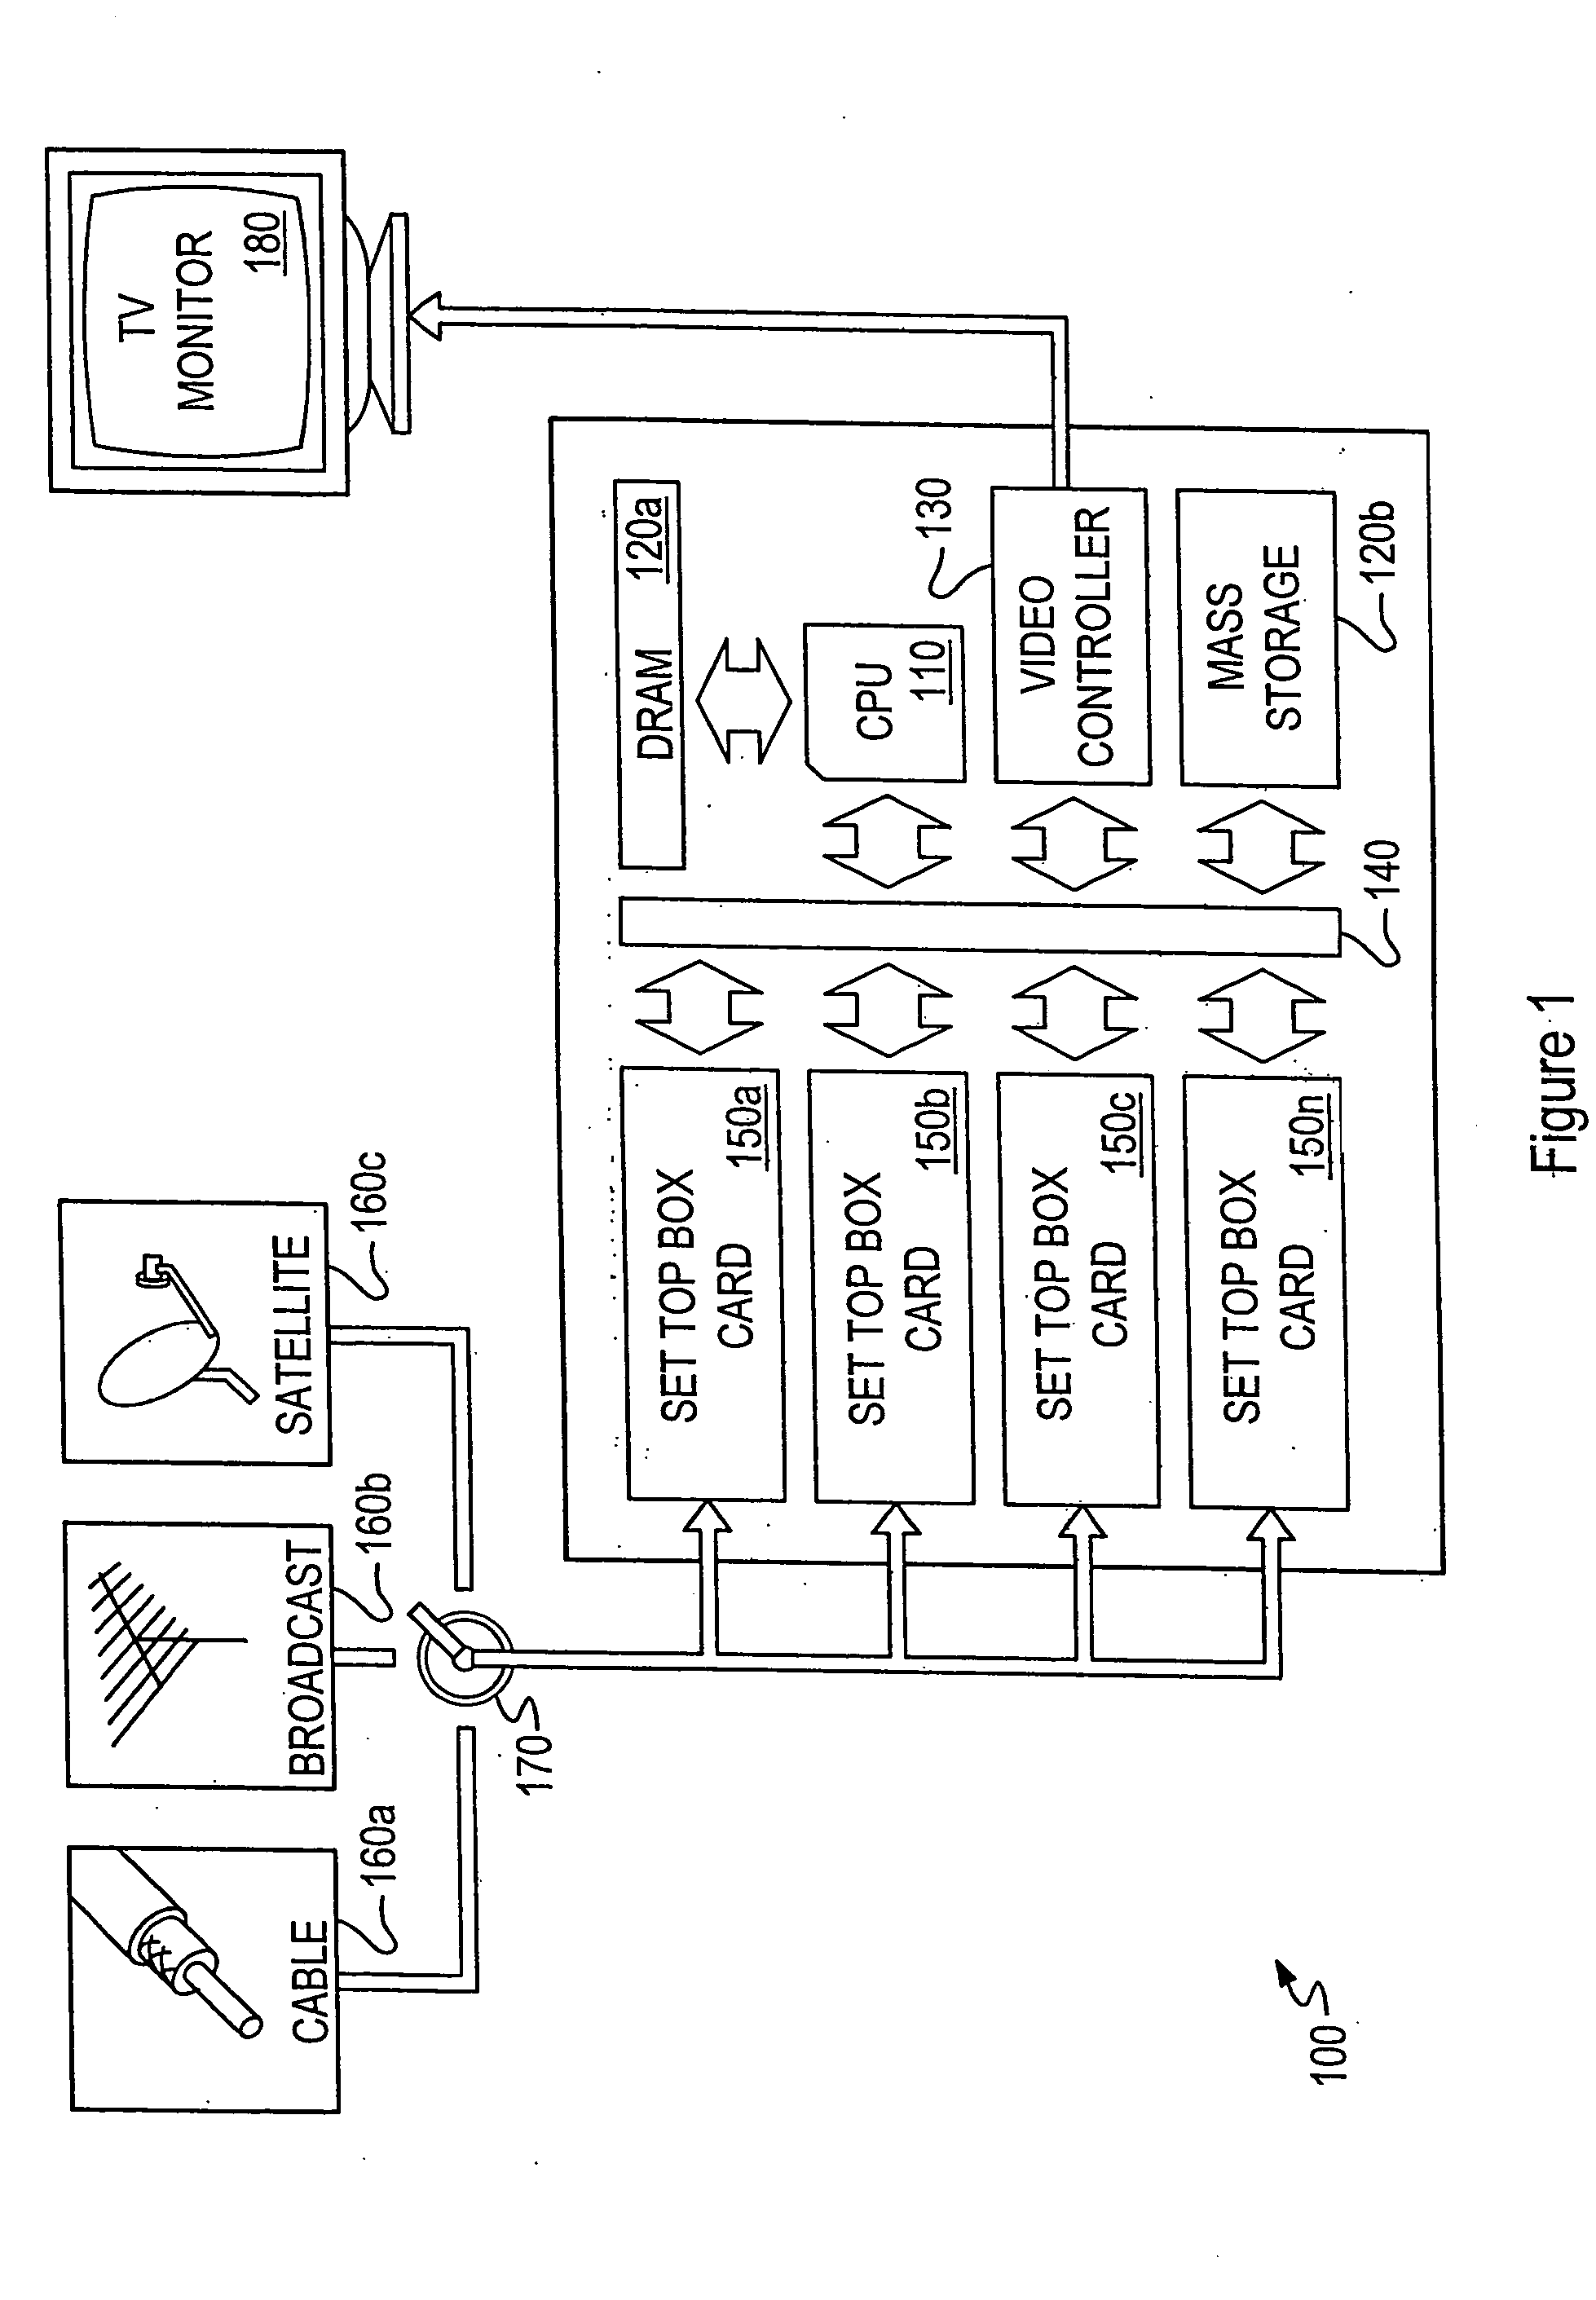 Systems and methods for storing a plurality of video streams on re-writable random-access media and time- and channel-based retrieval thereof